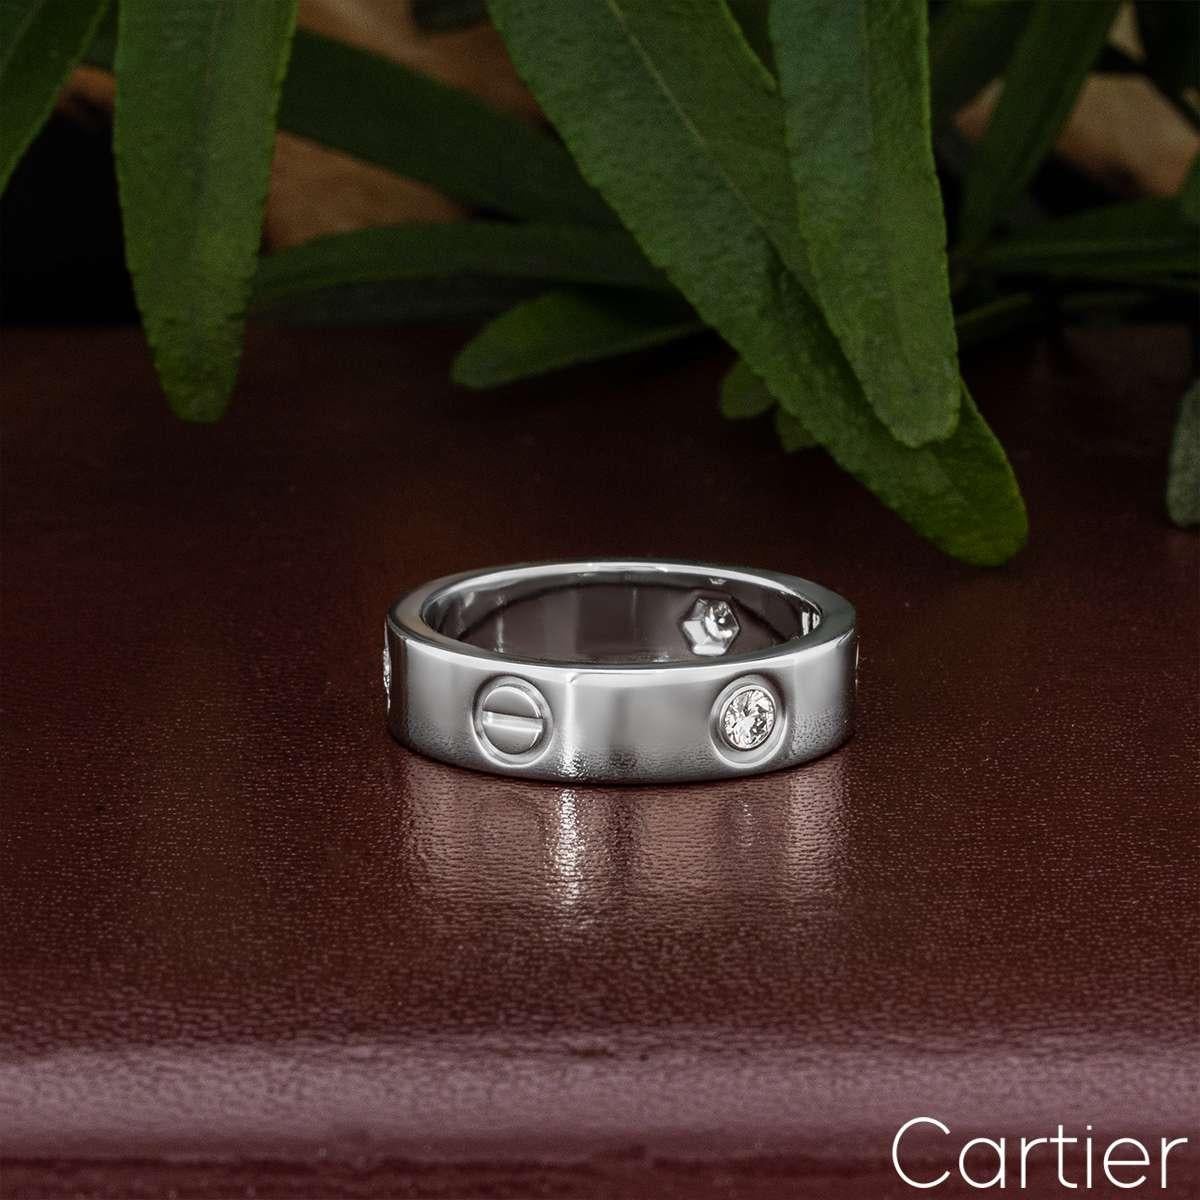 Cartier White Gold Half Diamond Love Ring Size 56 B4032500 For Sale 2